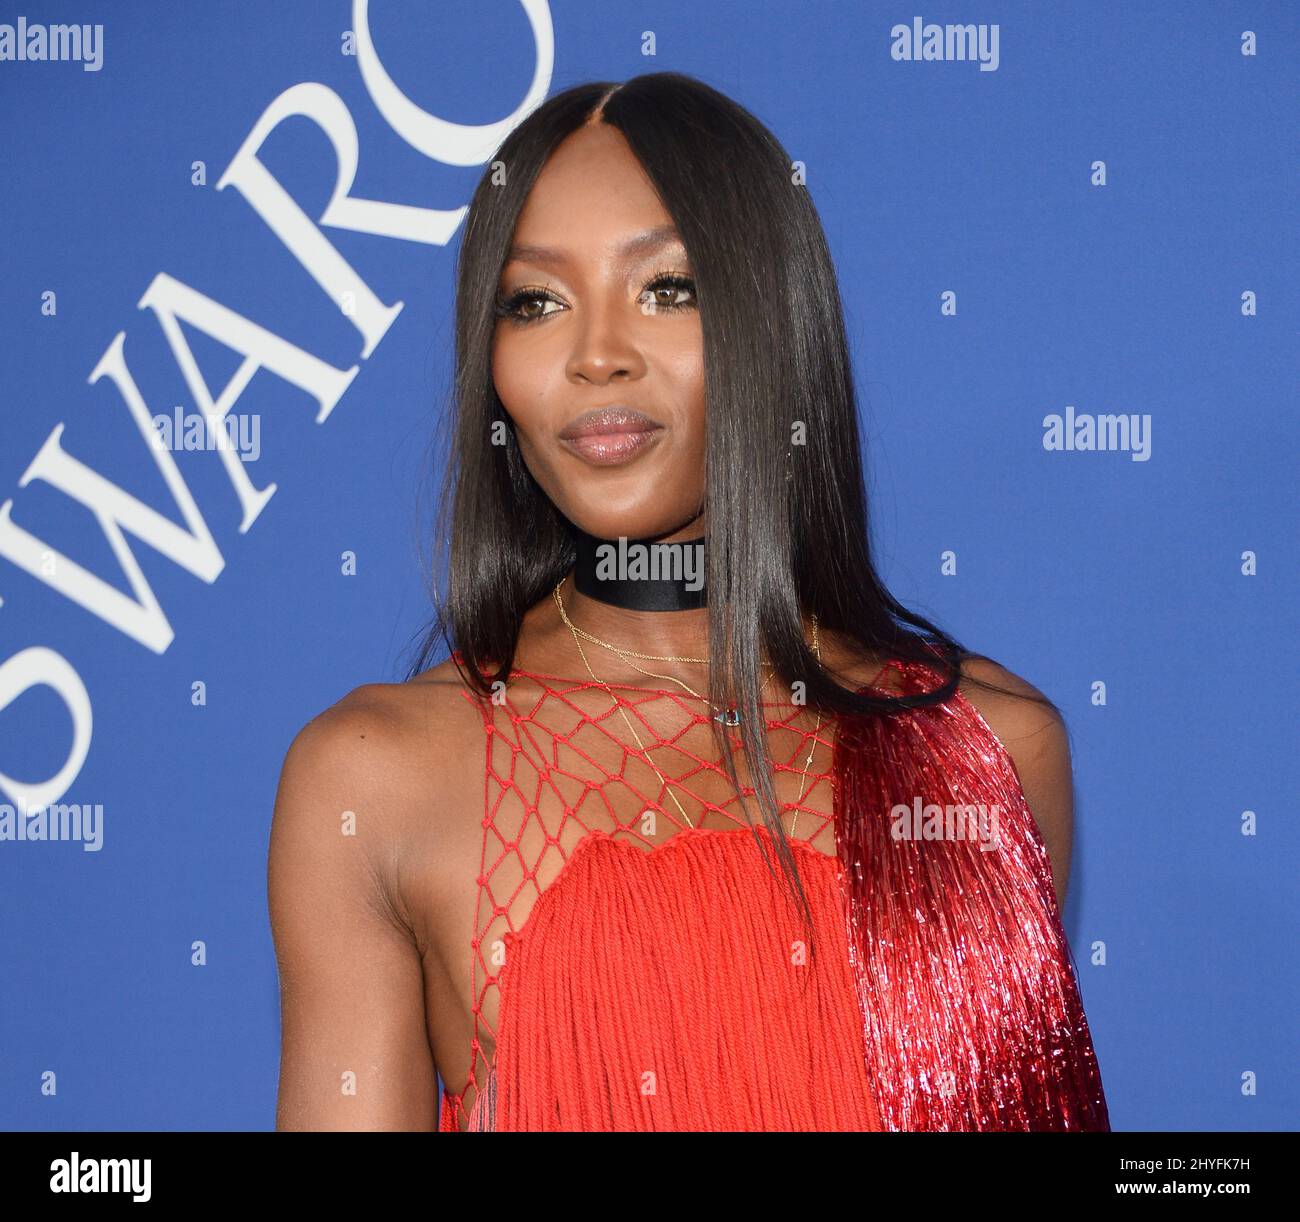 Naomi Campbell at the 2018 CFDA Fashion Awards held at the Brooklyn Museum on June 4, 2018 in Brooklyn, NY Stock Photo